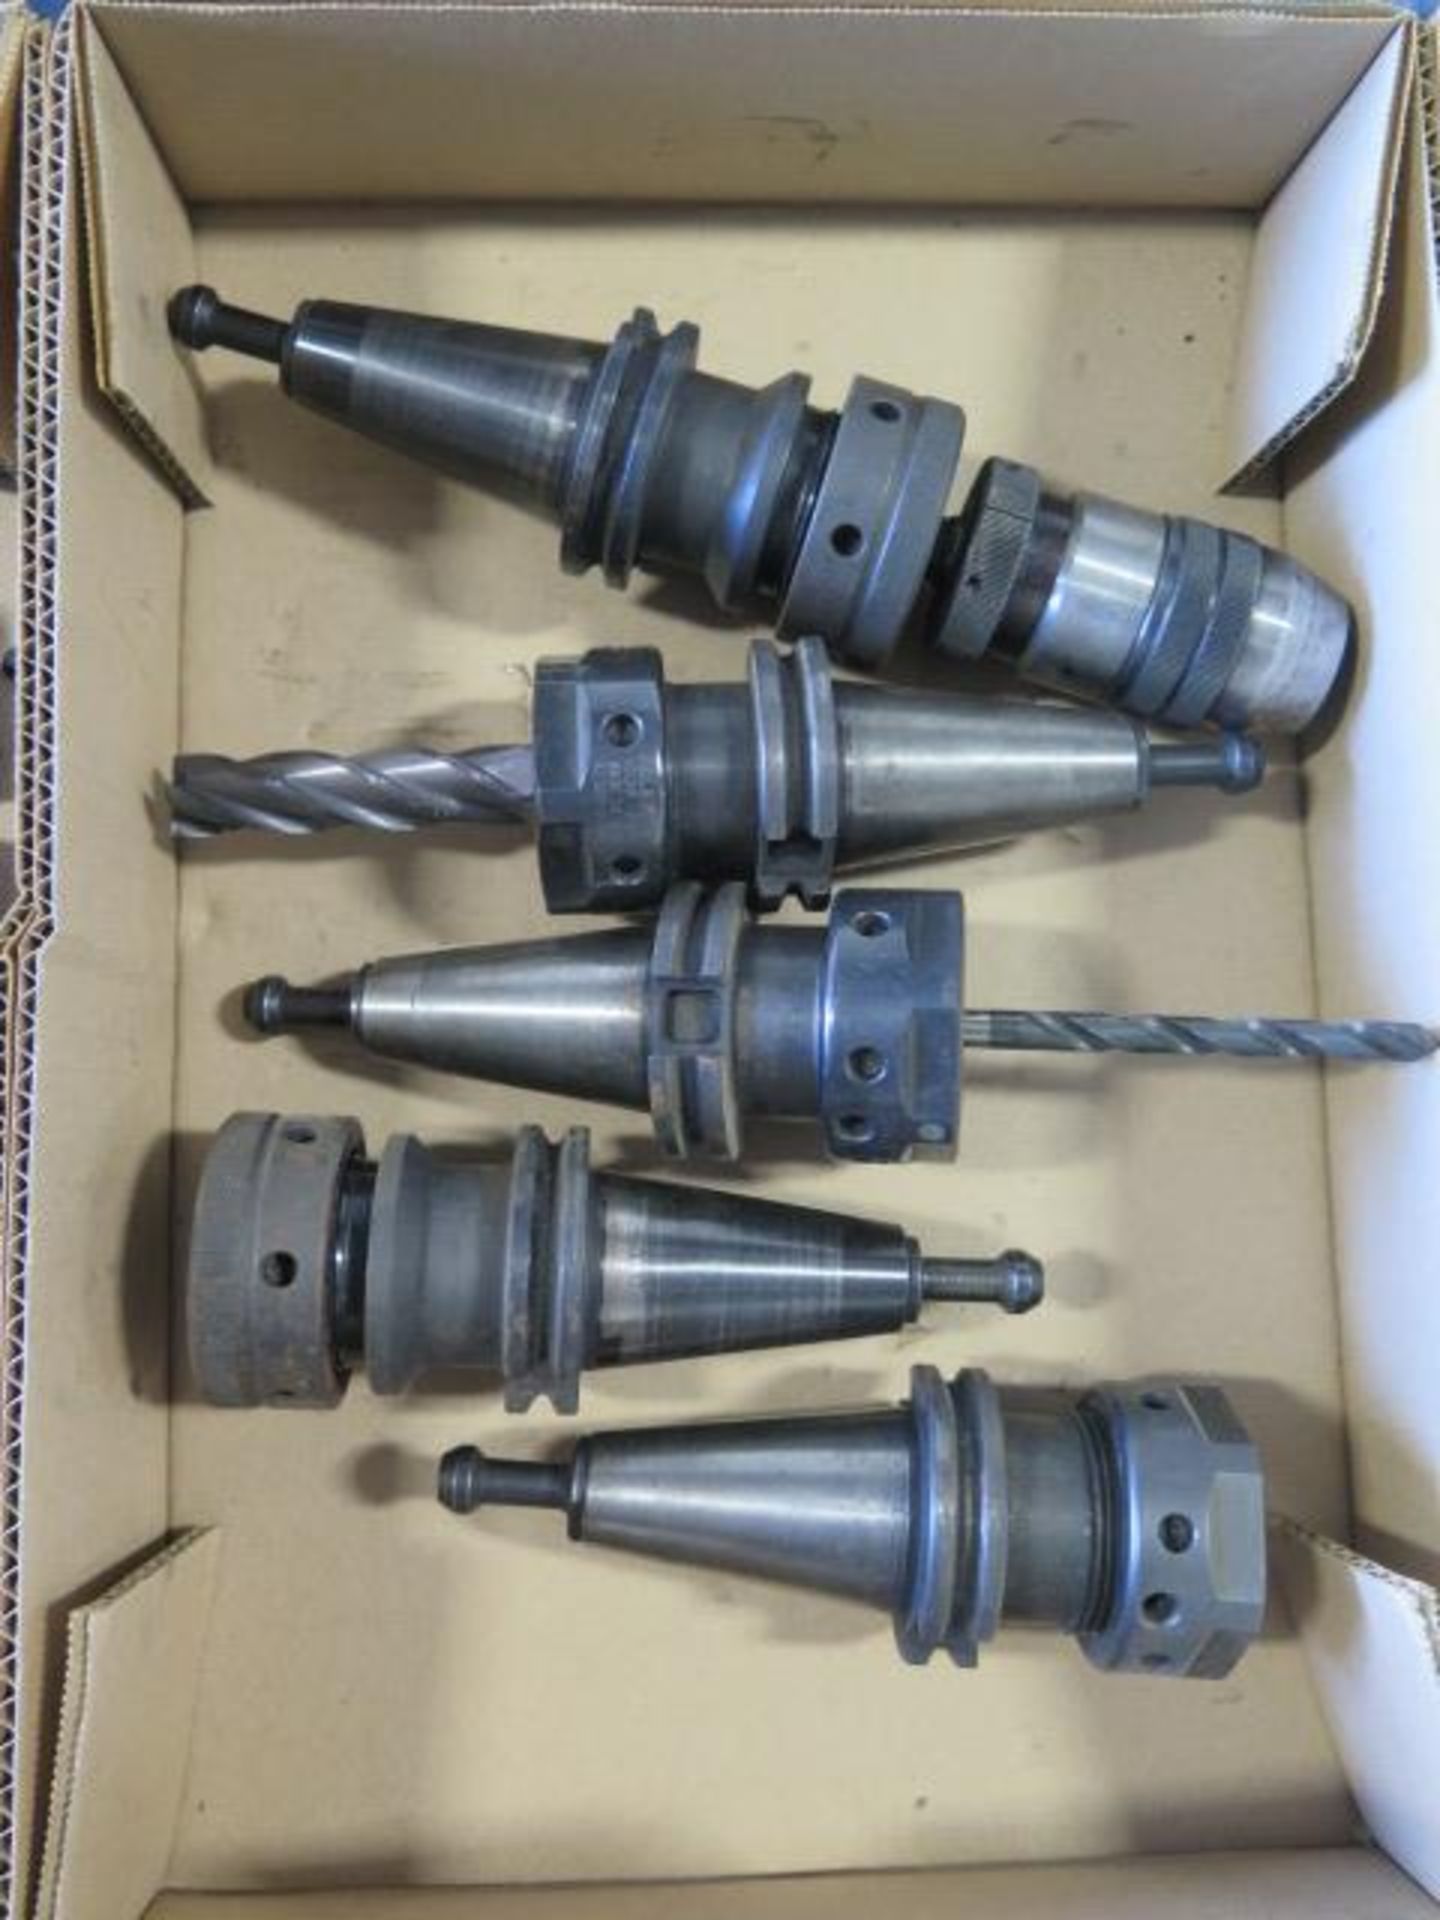 CAT-40 Taper TG-100 Collet Chucks and Drill Chcuk (5) (SOLD AS-IS - NO WARRANTY) - Image 2 of 4